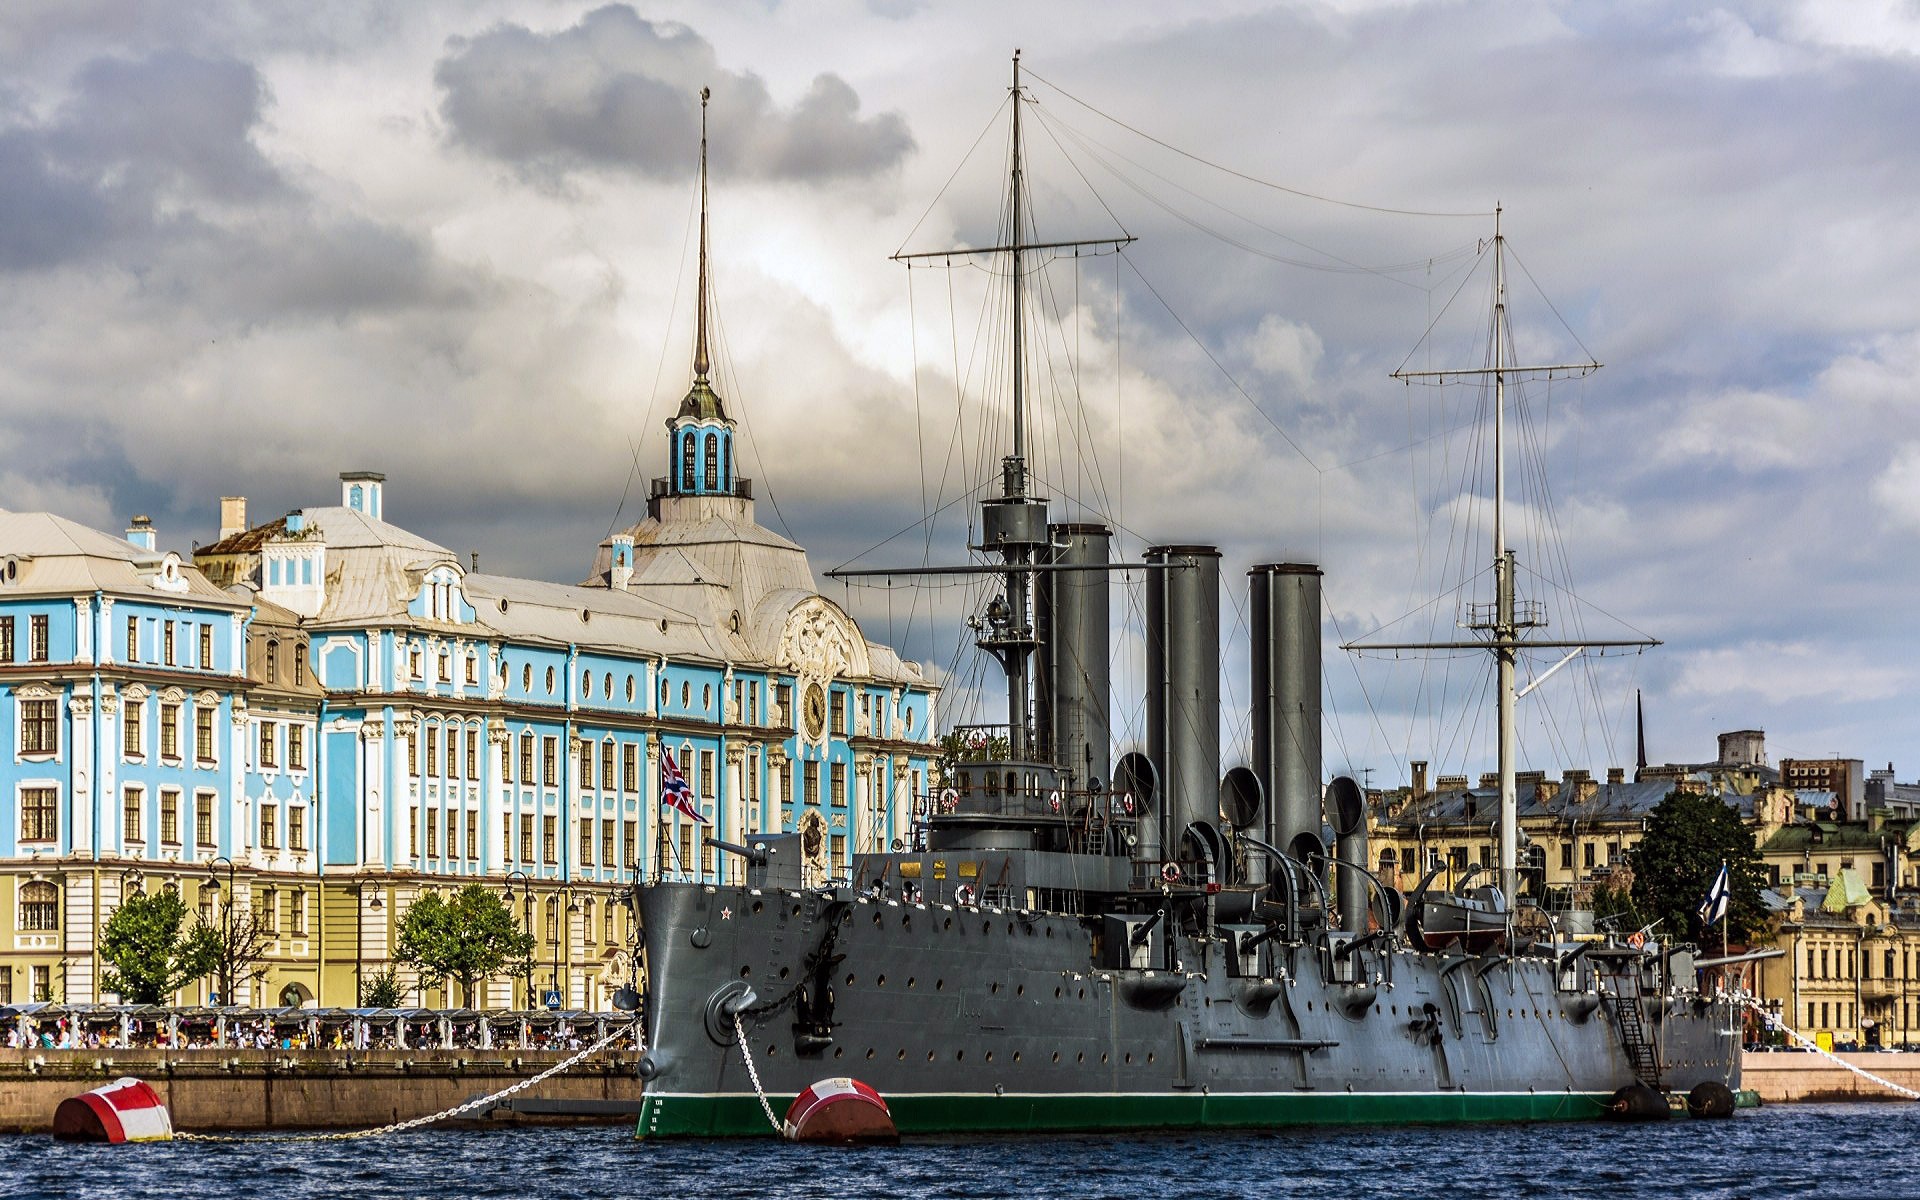 General 1920x1200 ship clouds water aurorae St. Petersburg Russia building shipyard chains flag city battleships old building trees window military military vehicle vehicle warship